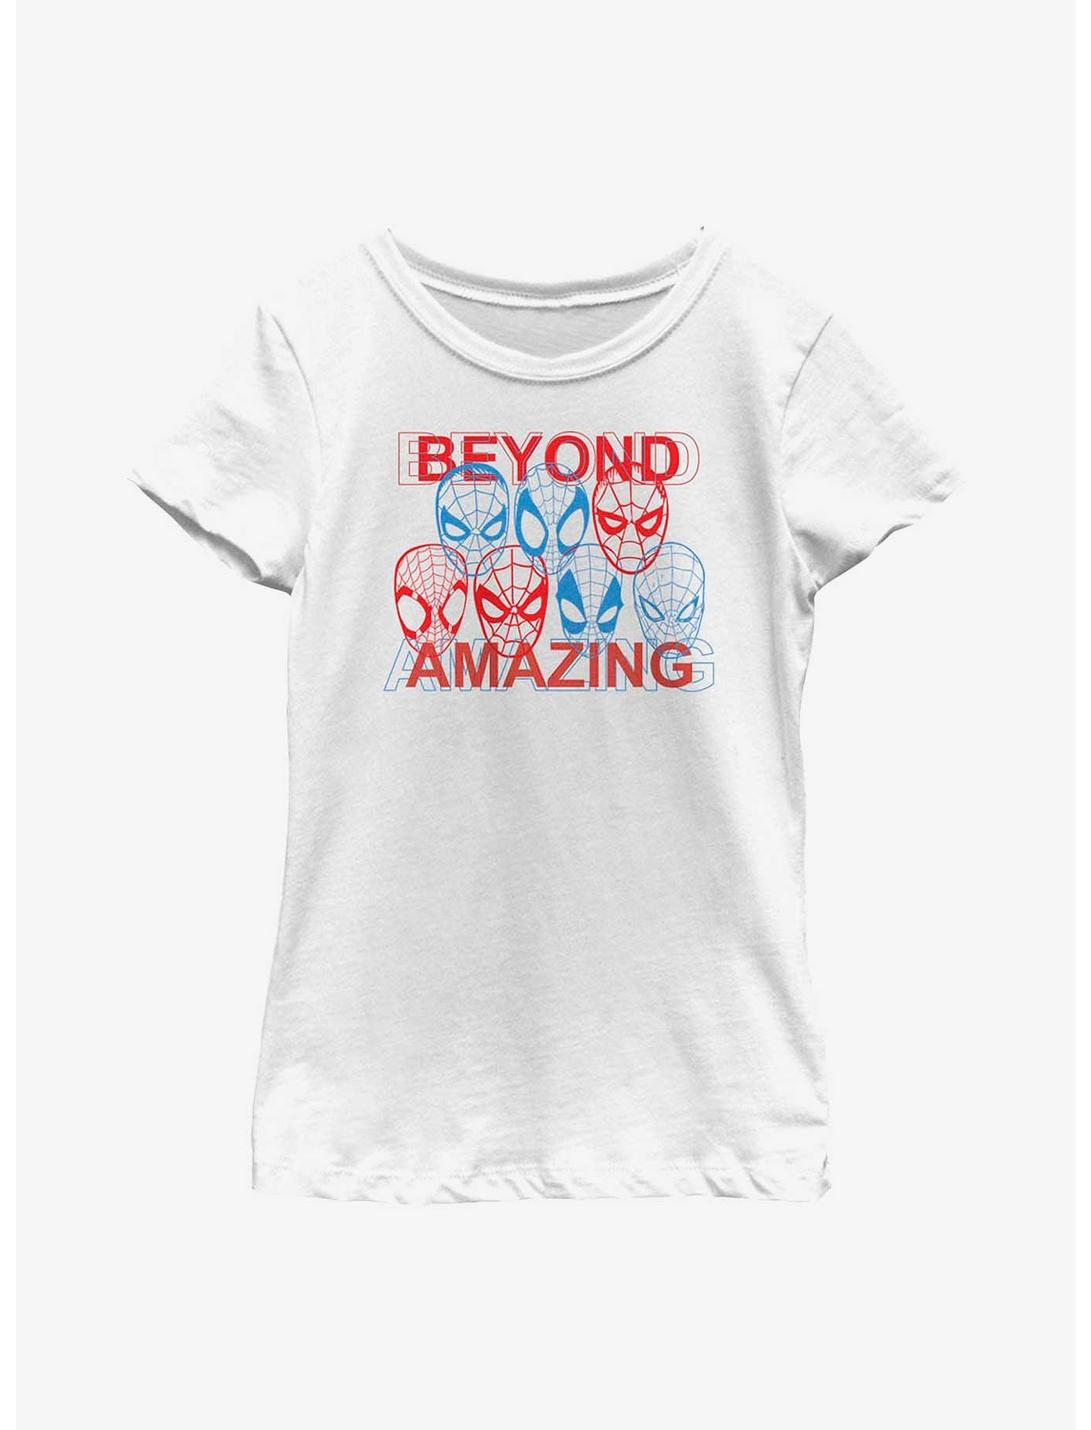 Marvel Spider-Man Beyond Amazing Faces Youth Girls T-Shirt, WHITE, hi-res